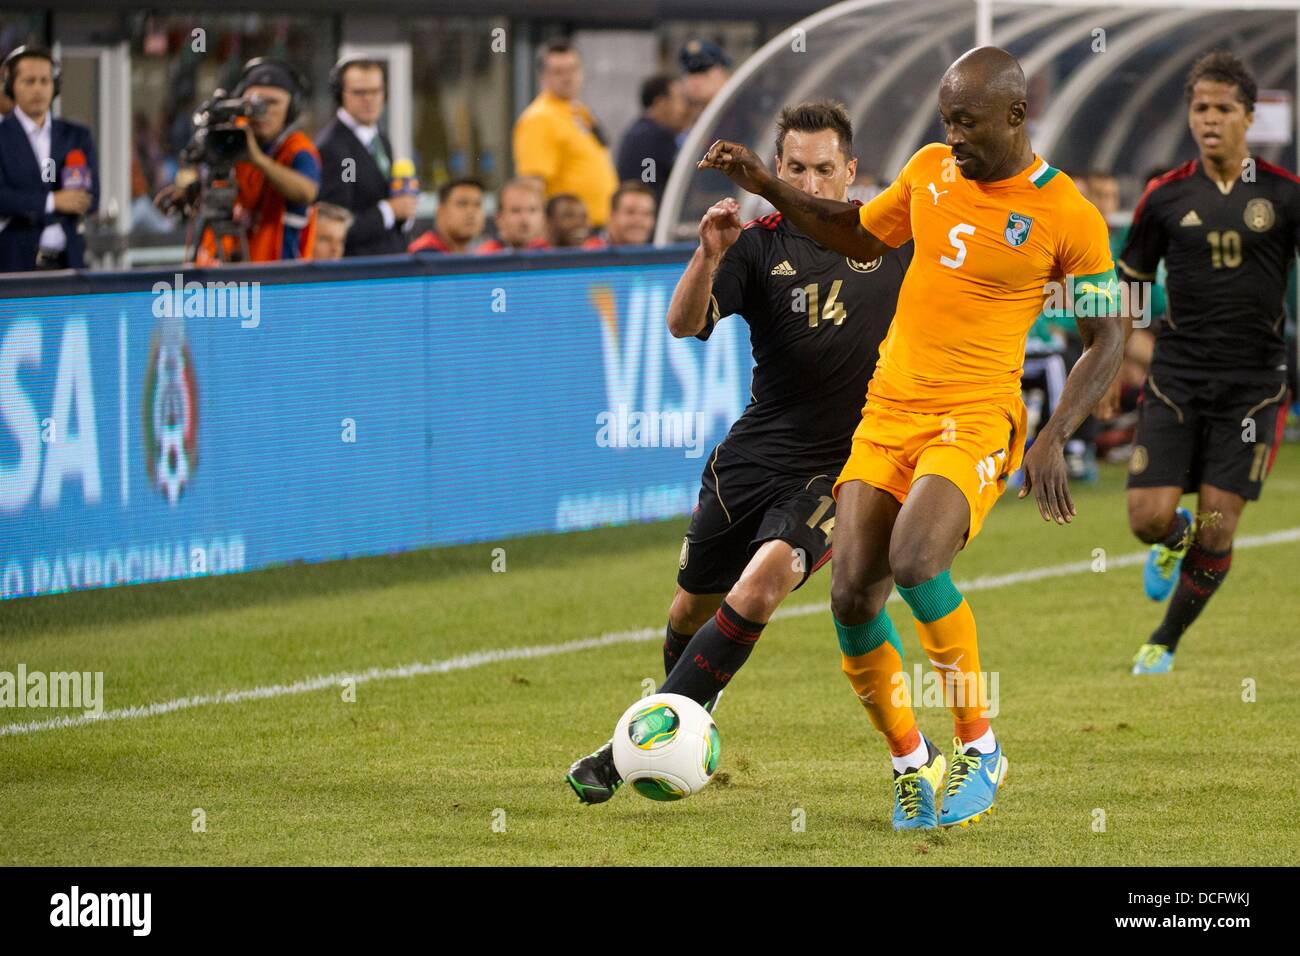 Aug. 14, 2013 - East Rutherford, New Jersey, U.S - August 14, 2013: Ivory Coast National Team defender Didier Zokora (5) looks to take the ball from Mexico National Team midfielder Christian Gimenez (14) during the International friendly match between Mexico and Ivory Coast at Met Life Stadium, East Rutherford, NJ. Mexico defeated Ivory Coast 4-1. Stock Photo